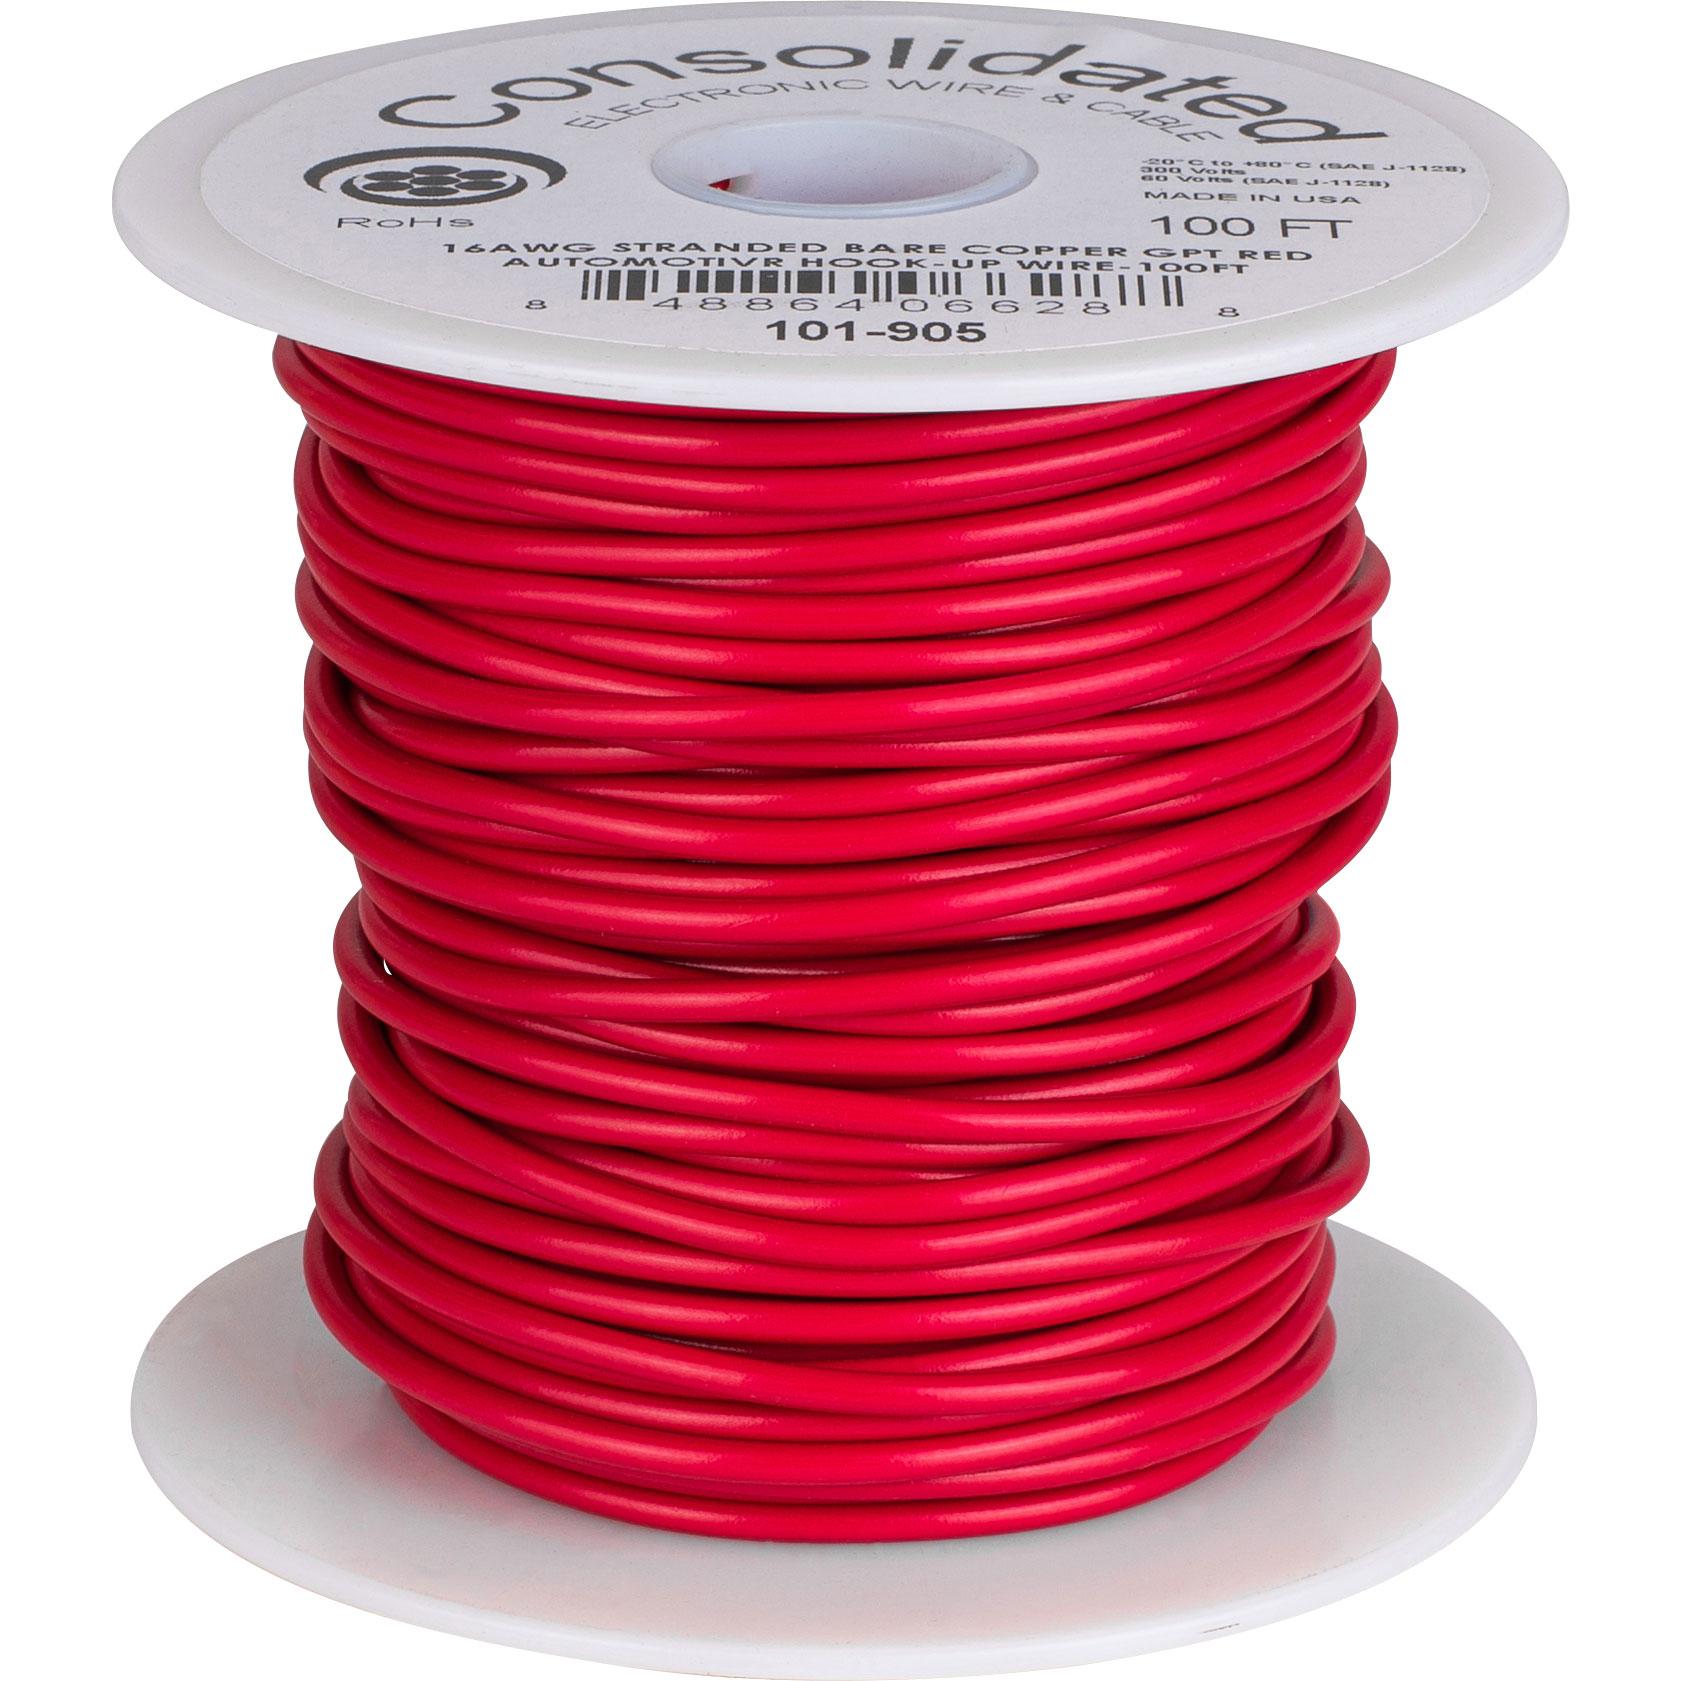 Electrical Primary Wire GPT 20 gauge